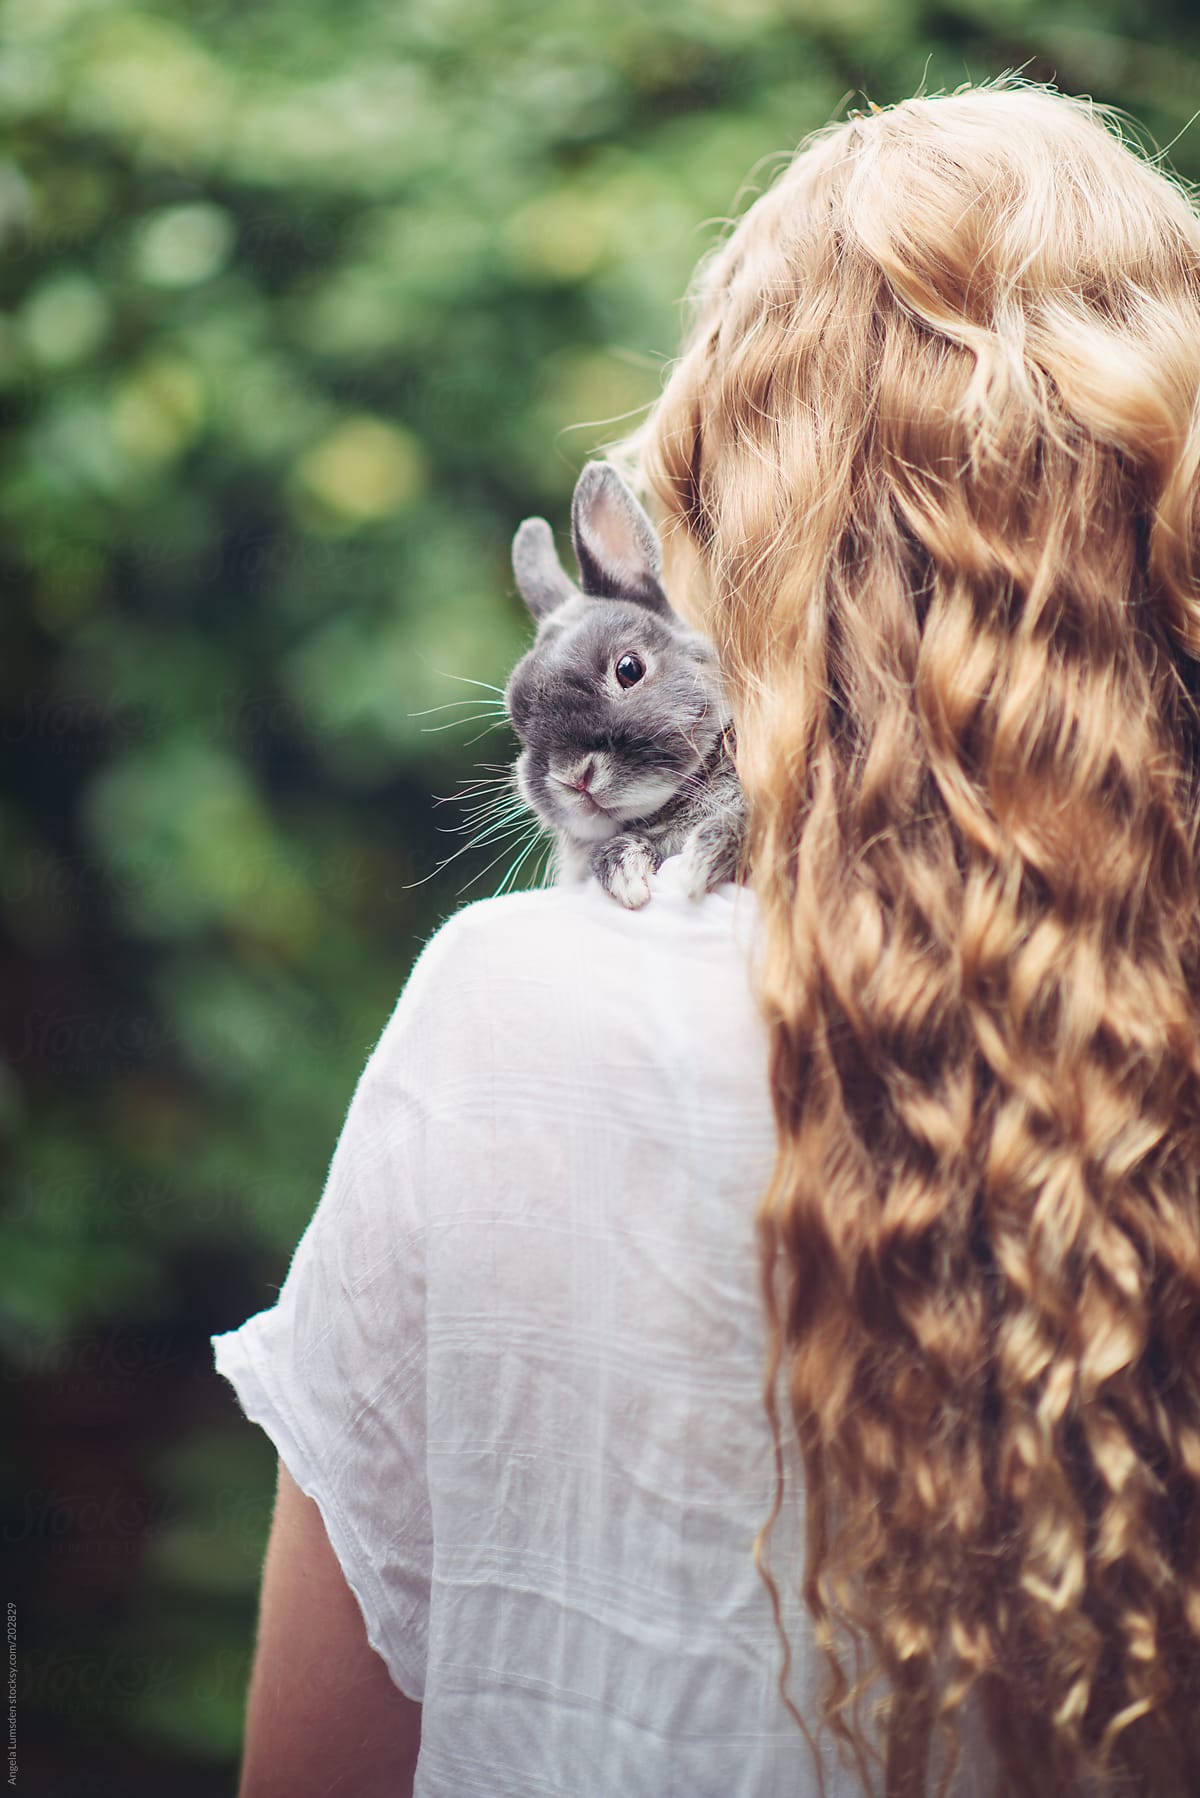 Teenage girl with a small grey rabbit